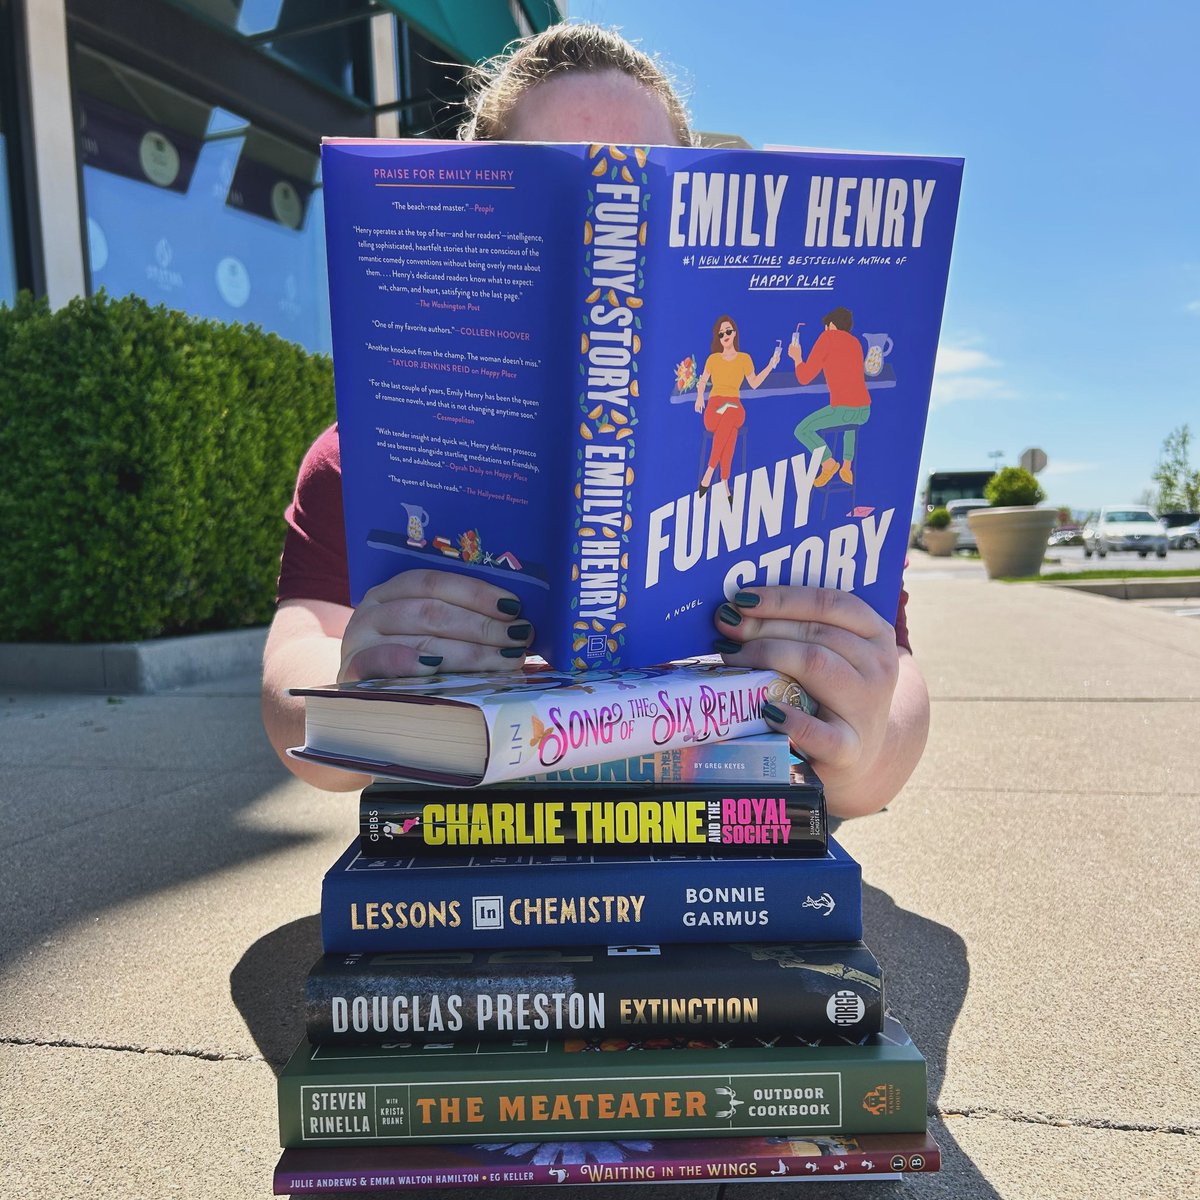 Happy #worldbookday 📚 It’s a great day to celebrate by reading the books you have or by getting a new book! 

#mybn #bnbuzz #sandyutah #saltlakecounty #slc #bn236 #bookstagram  #bookish #igreads #igbooks #booknerd #instabooks #booklove #instabook #newreleasetuesday